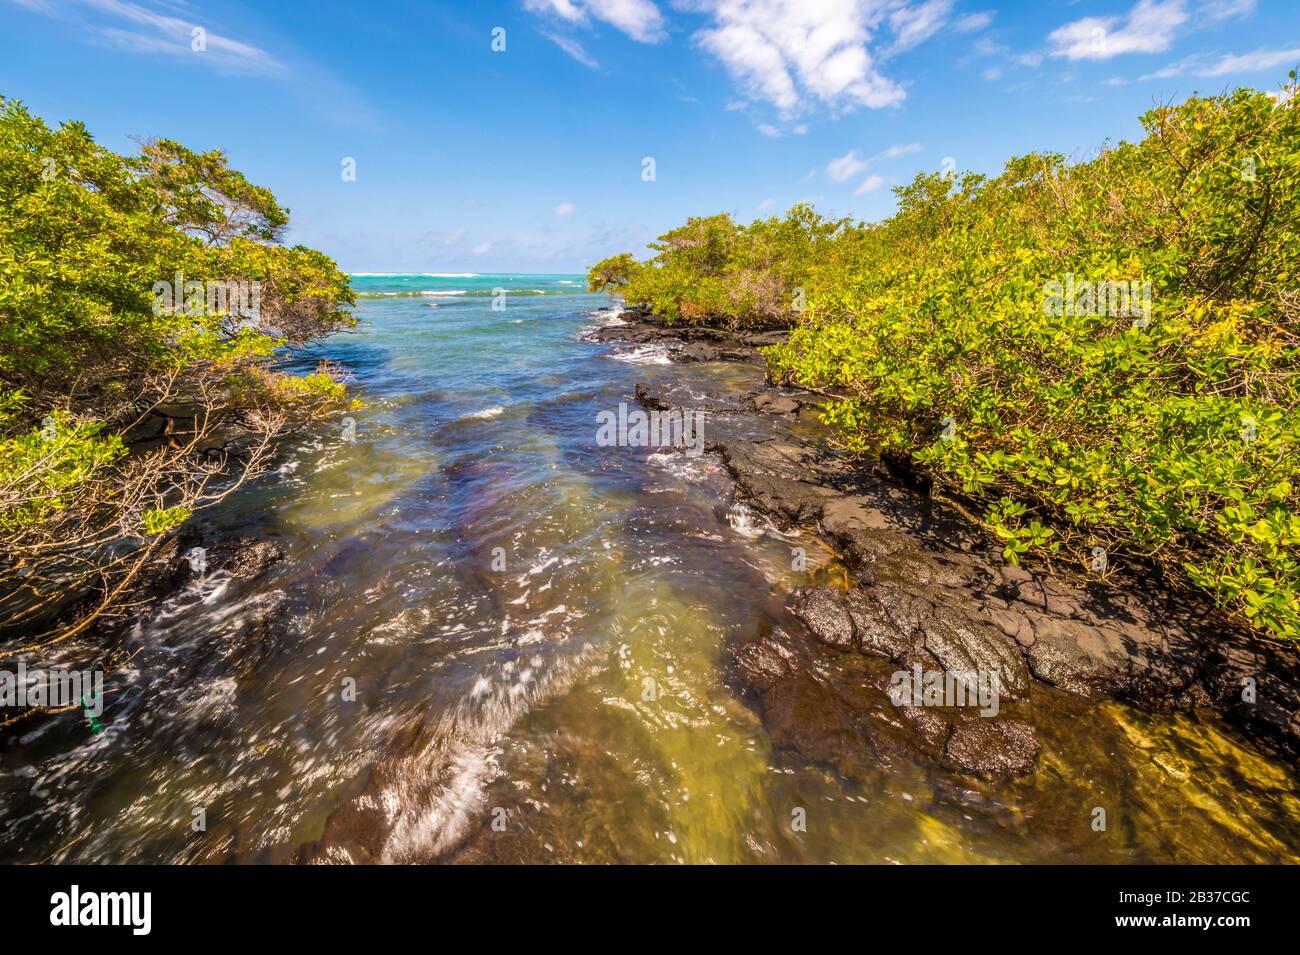 Ecuador, Galápagos archipelago, listed as World Heritage by UNESCO, Isle of Isabela (Albemarie), Wetland complex and Wall of Tears, maritime entry into the mangrove maze Stock Photo